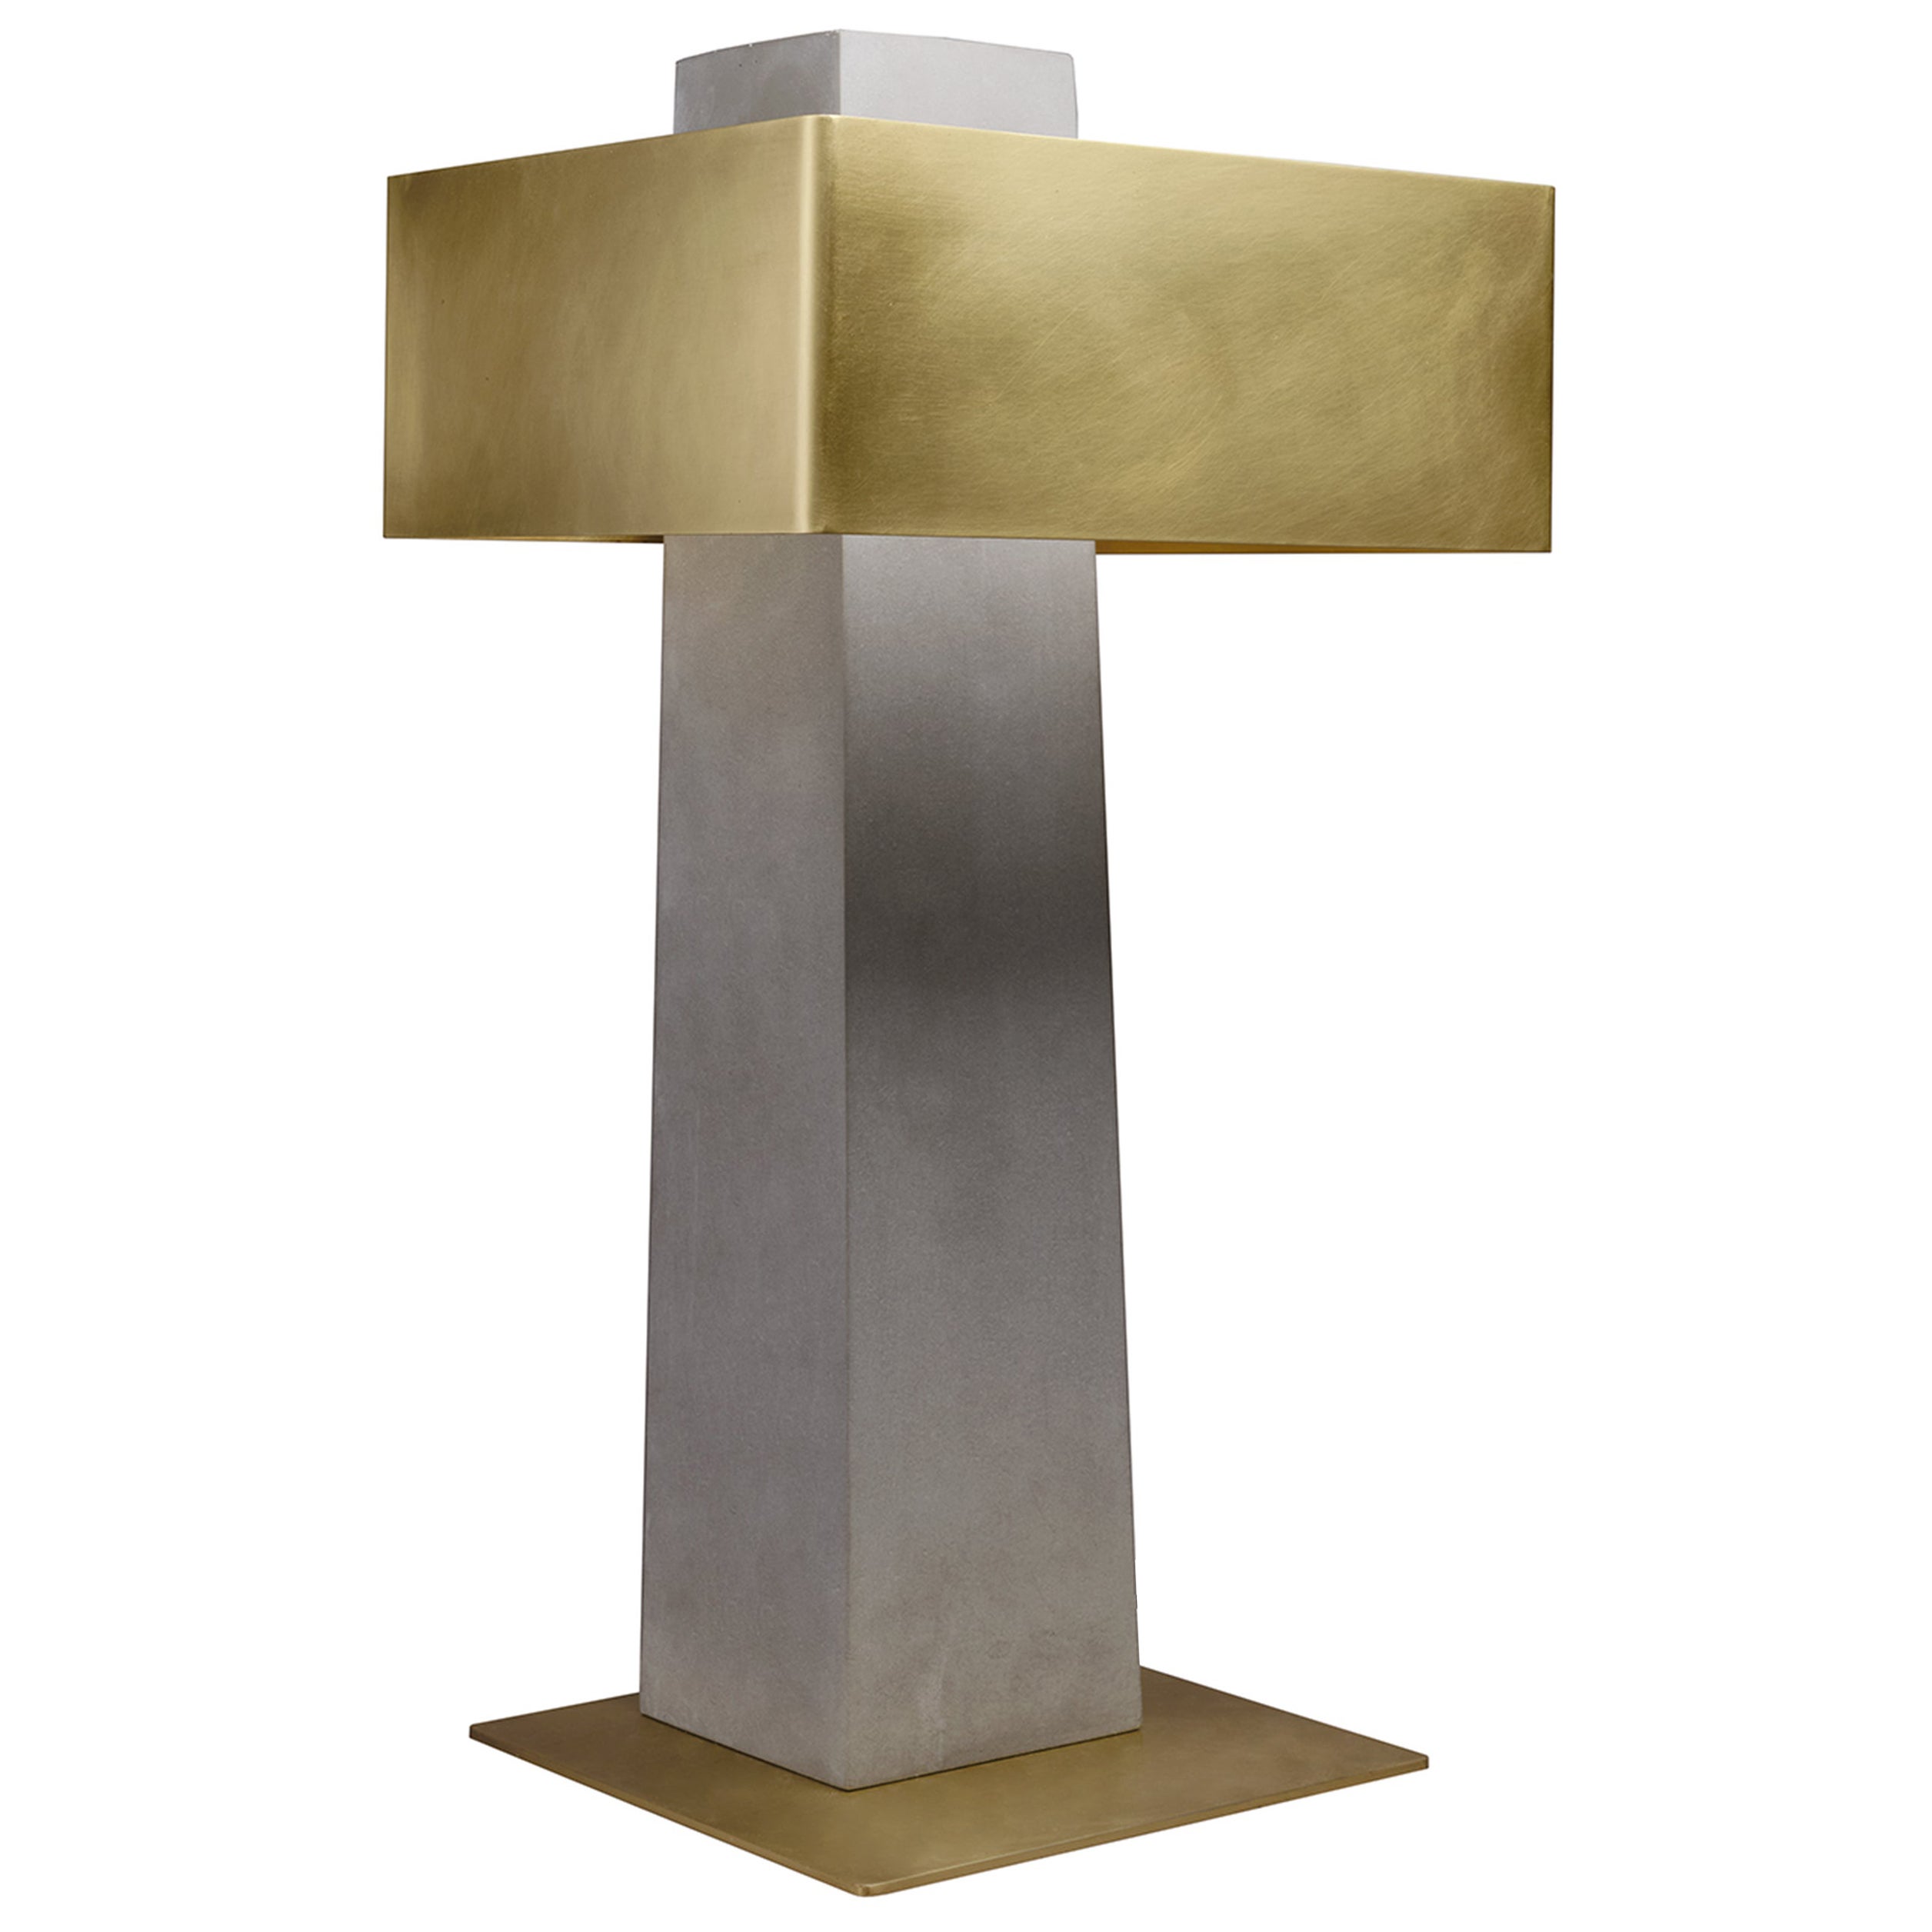 DCW Editions Iota Table Lamp in Gold Concrete & Steel by Clément Cauvet For Sale